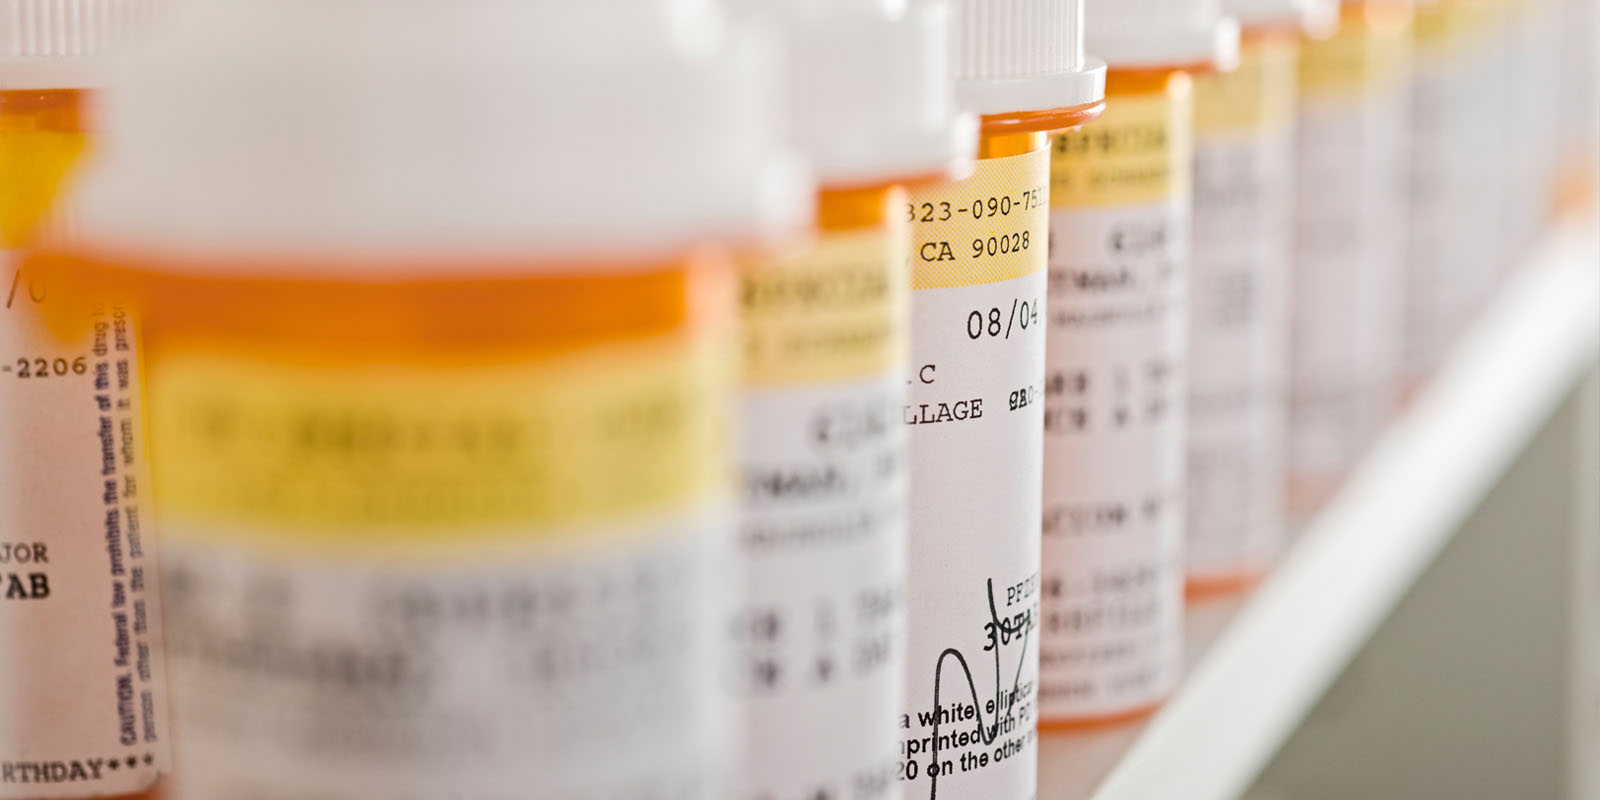 row of perscription medicine bottles with labels